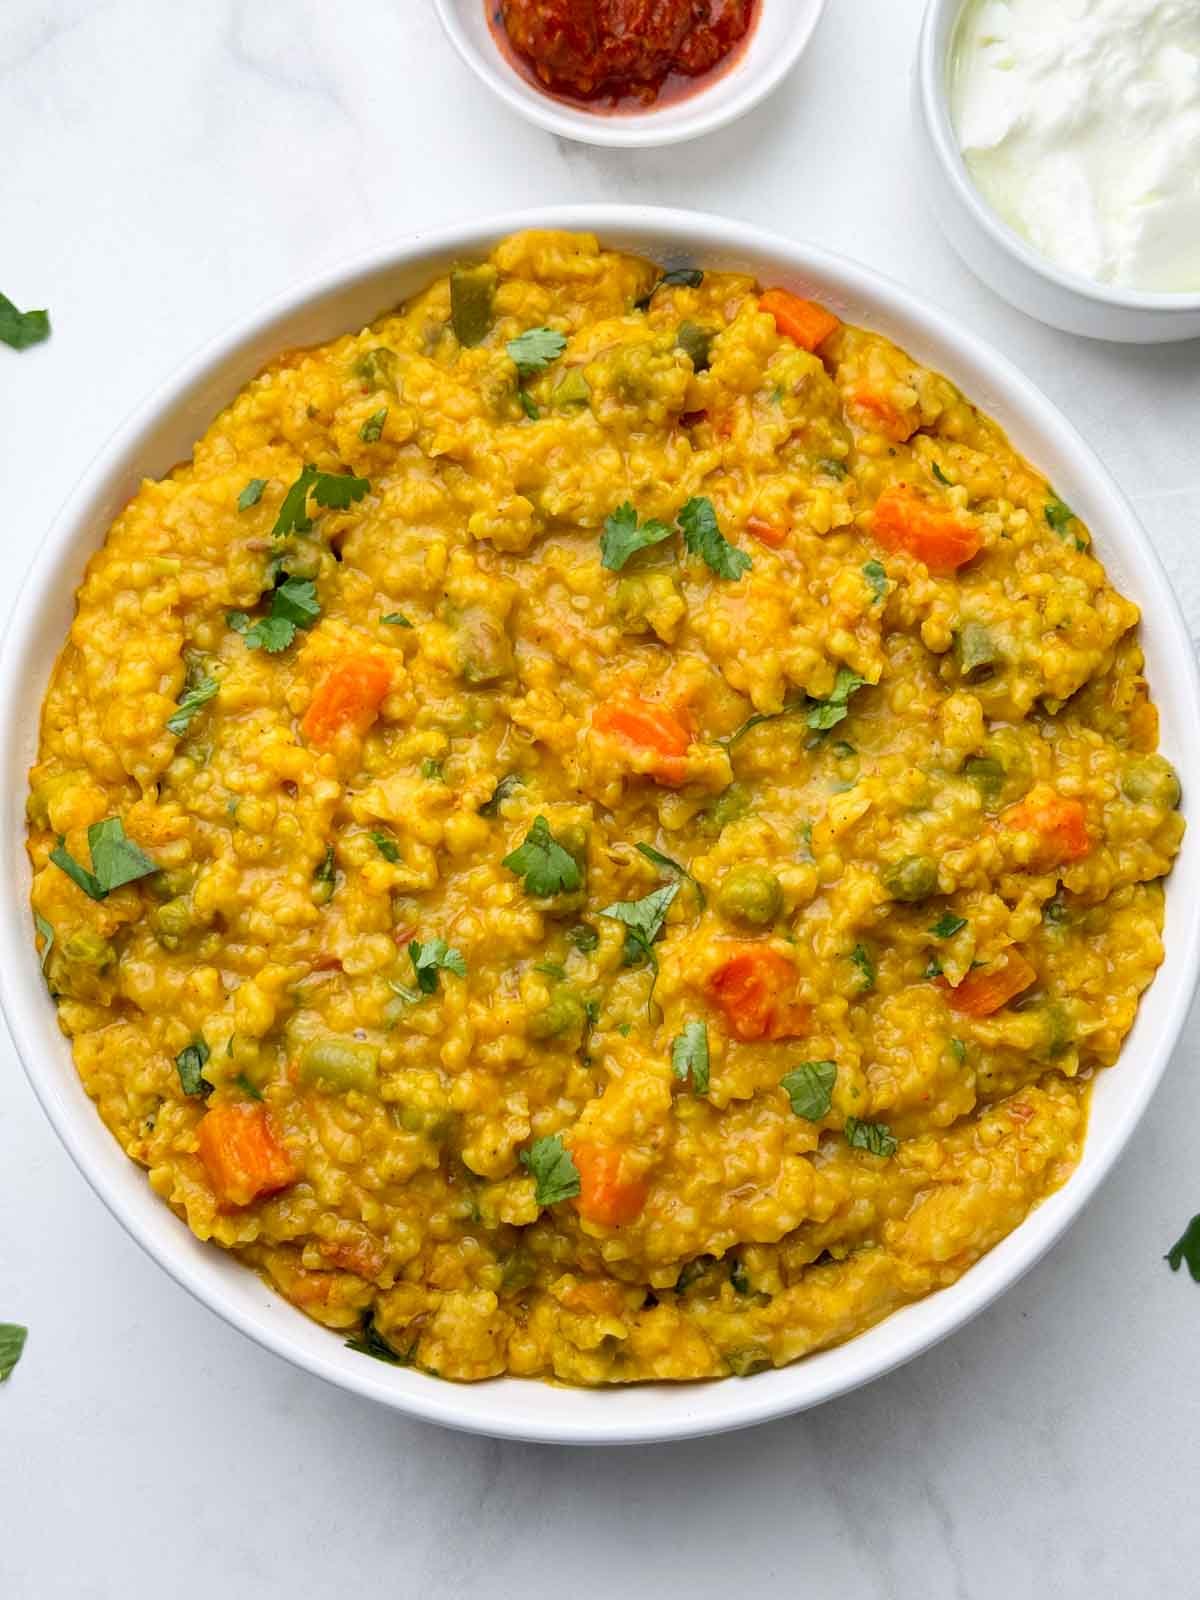 vegetable dalia khichdi (broken wheat khichdi) served in a bowl with pickle and yogurt on the side